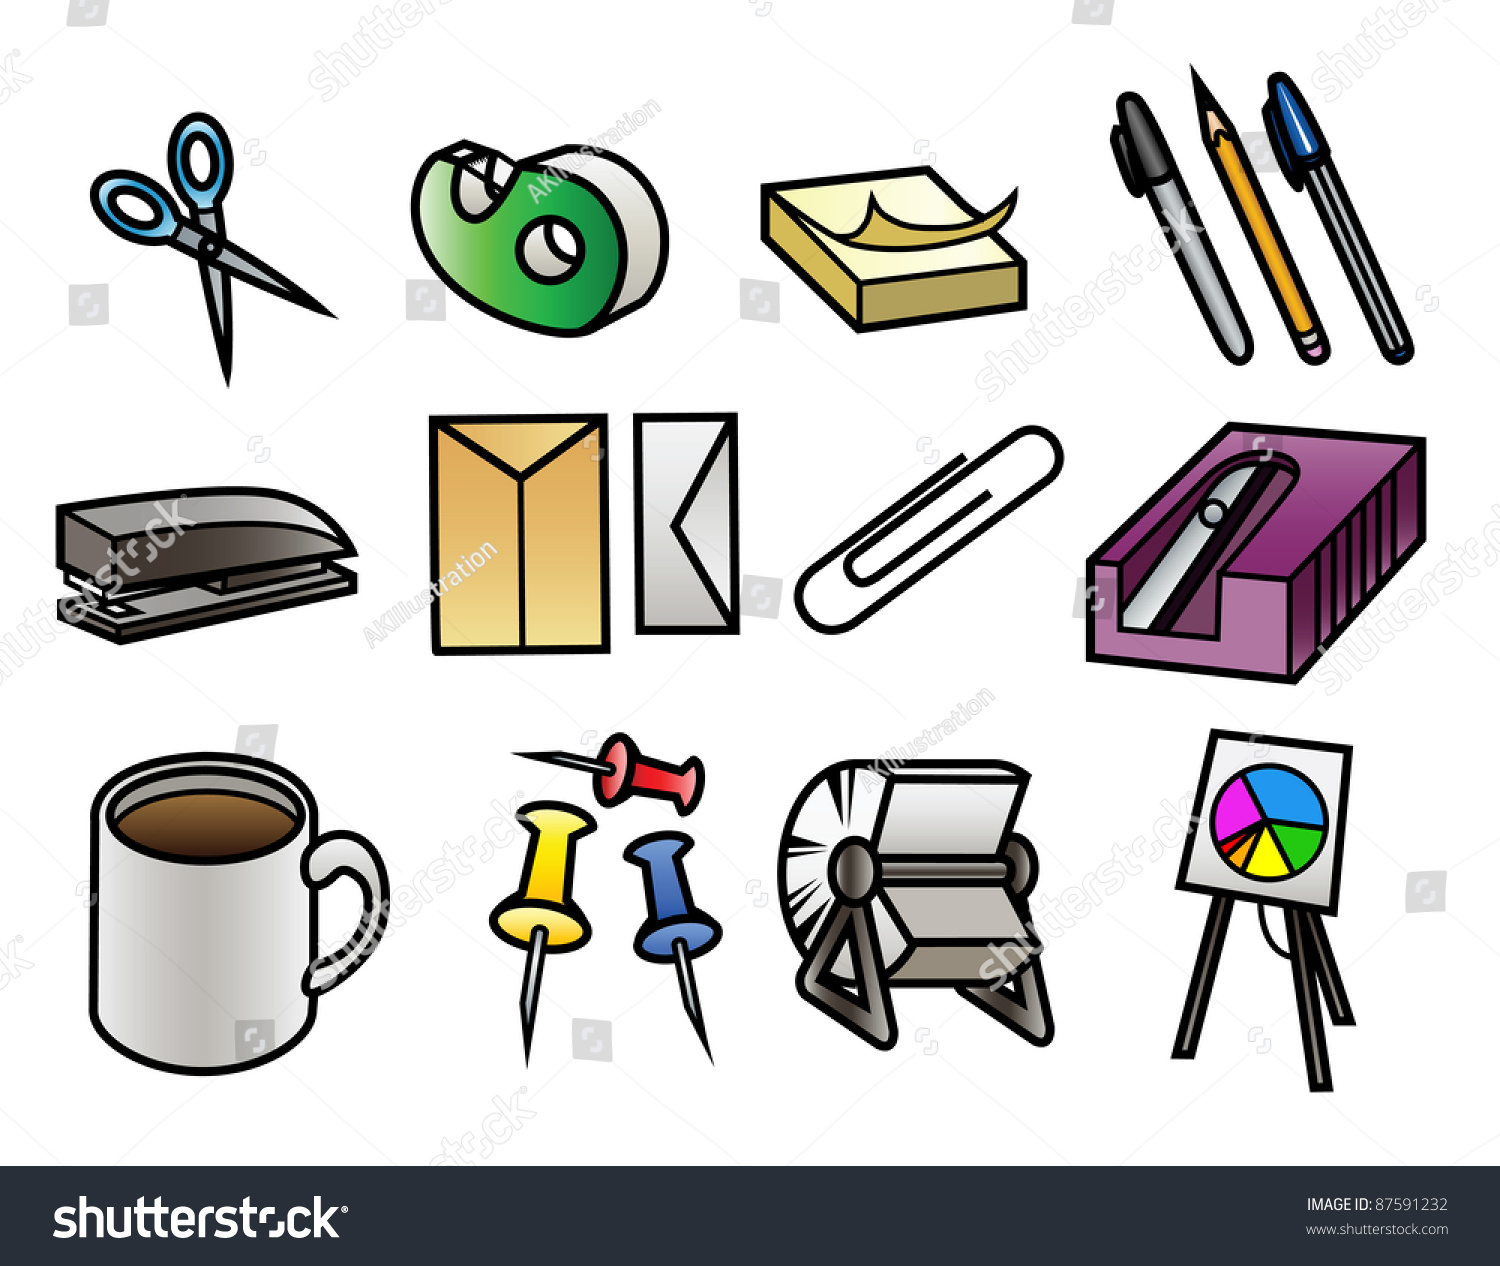 office equipment clipart free - photo #41